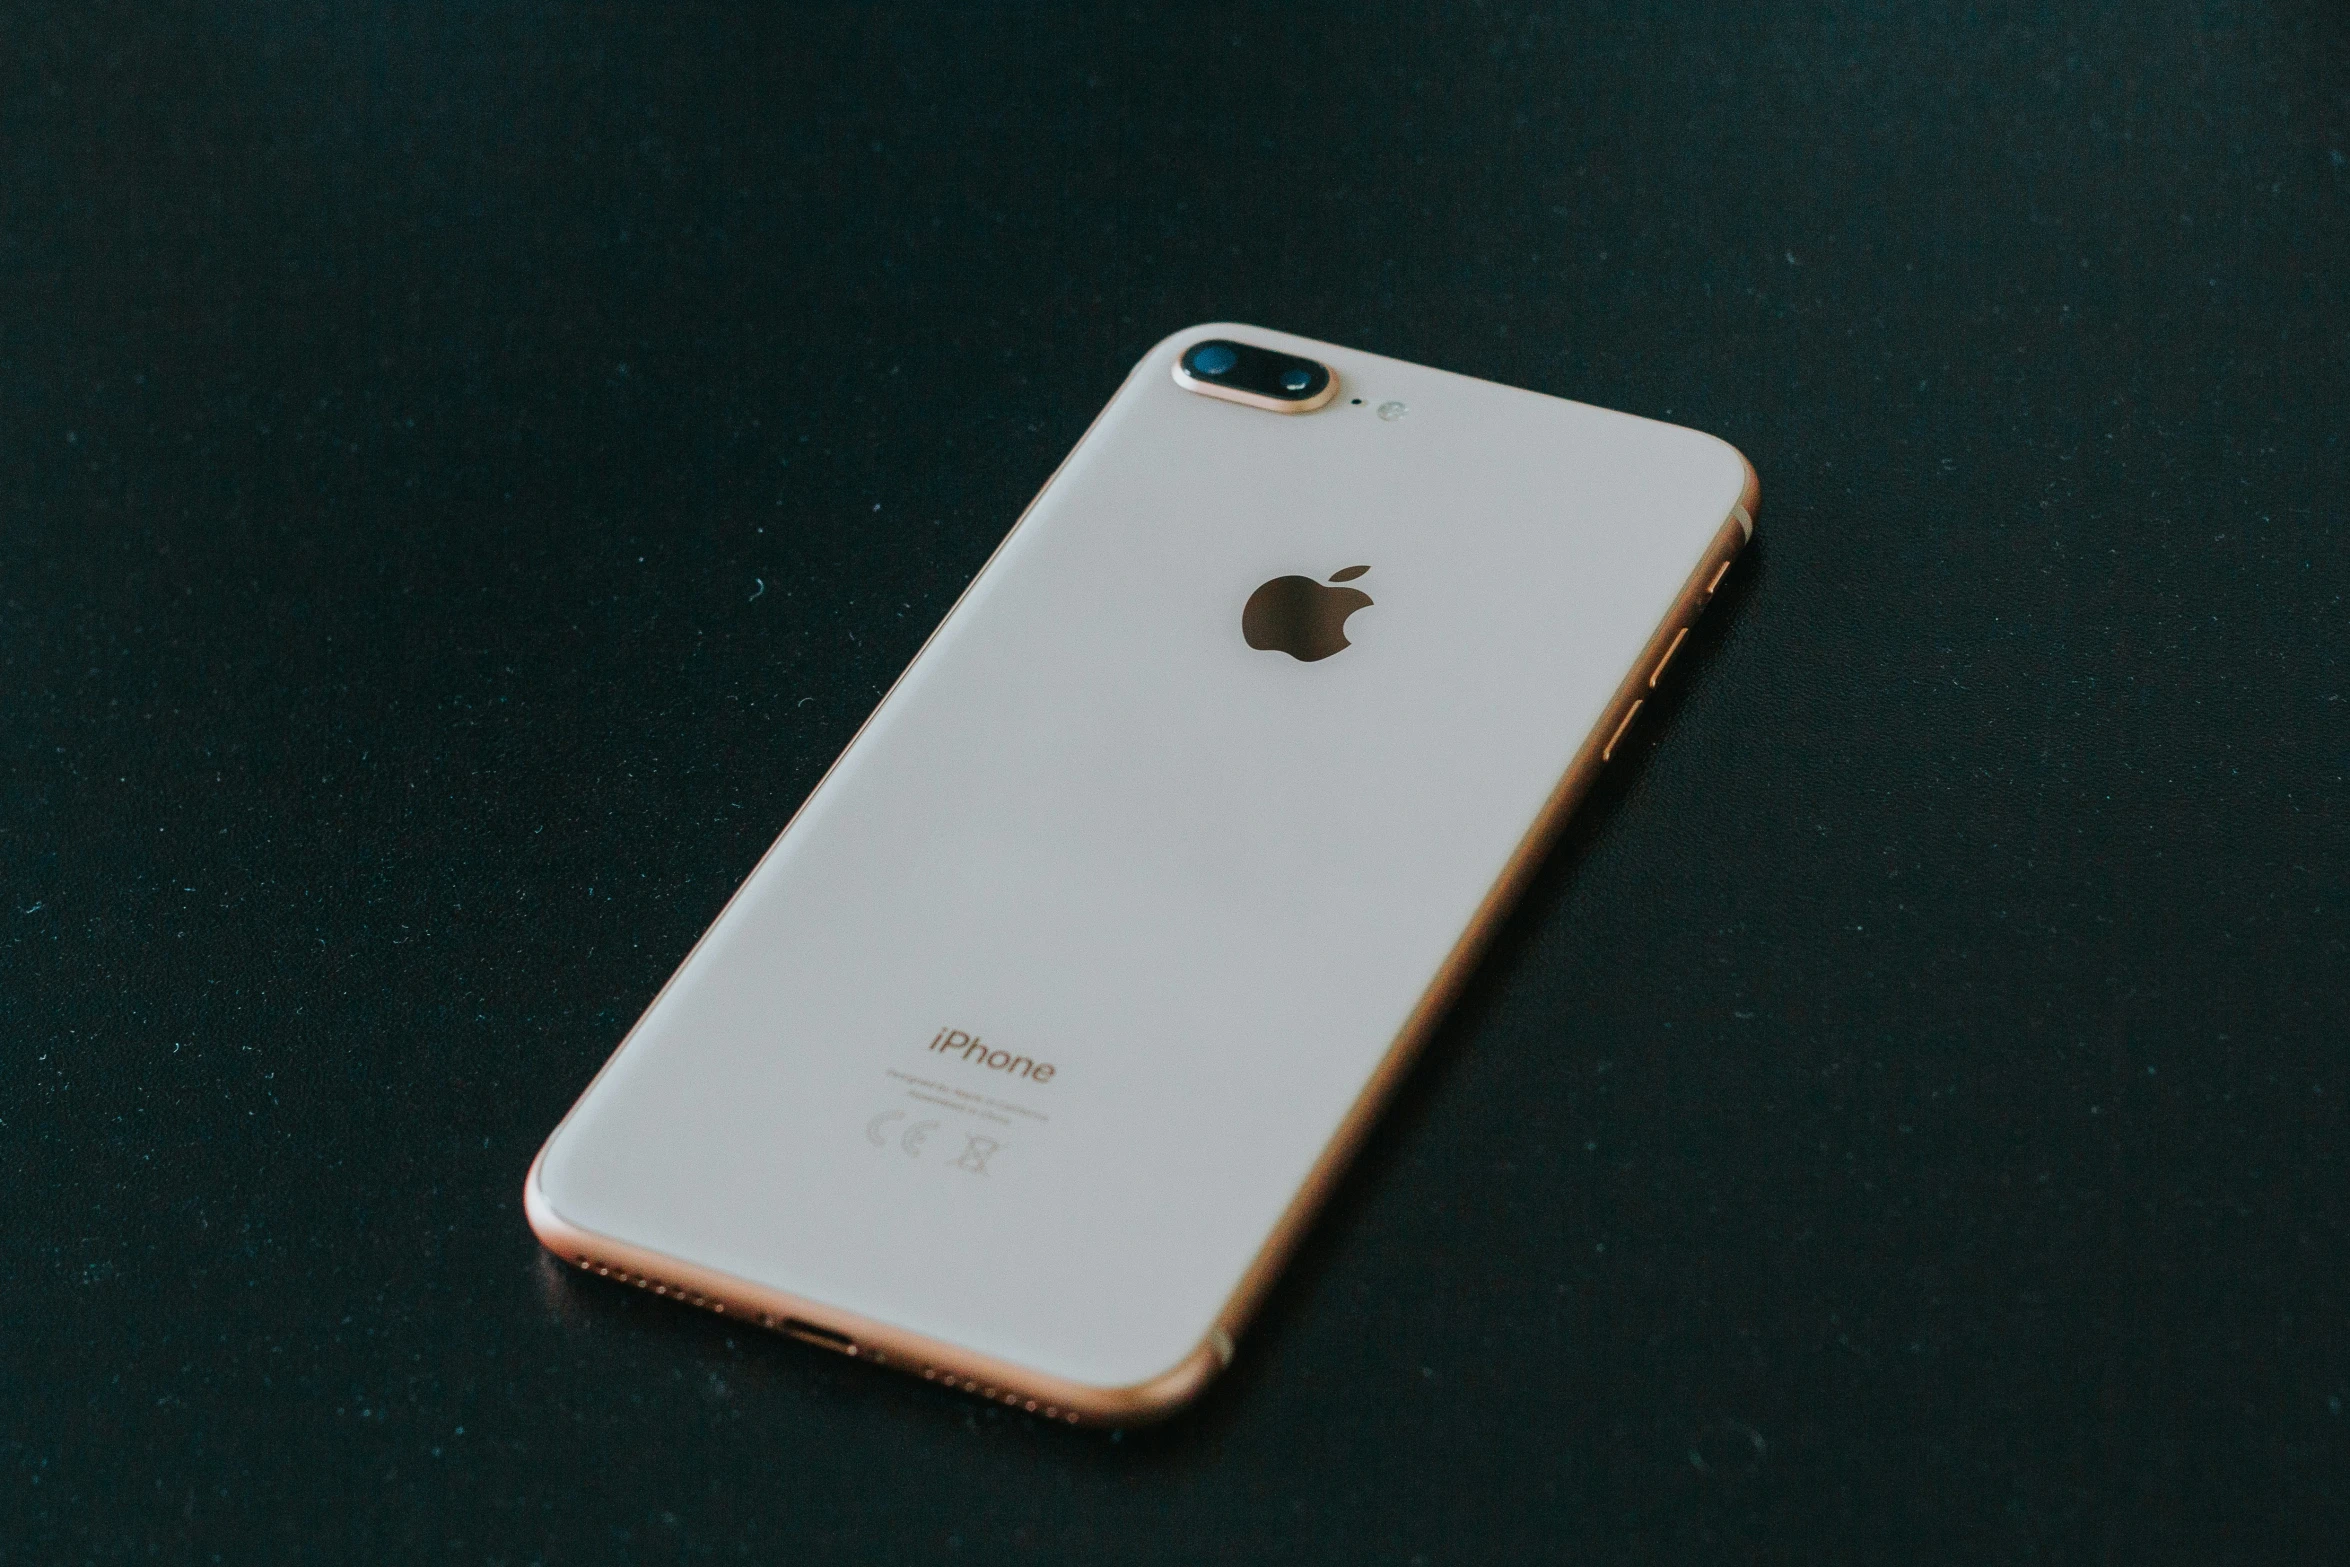 an iphone is seen laying on a dark surface